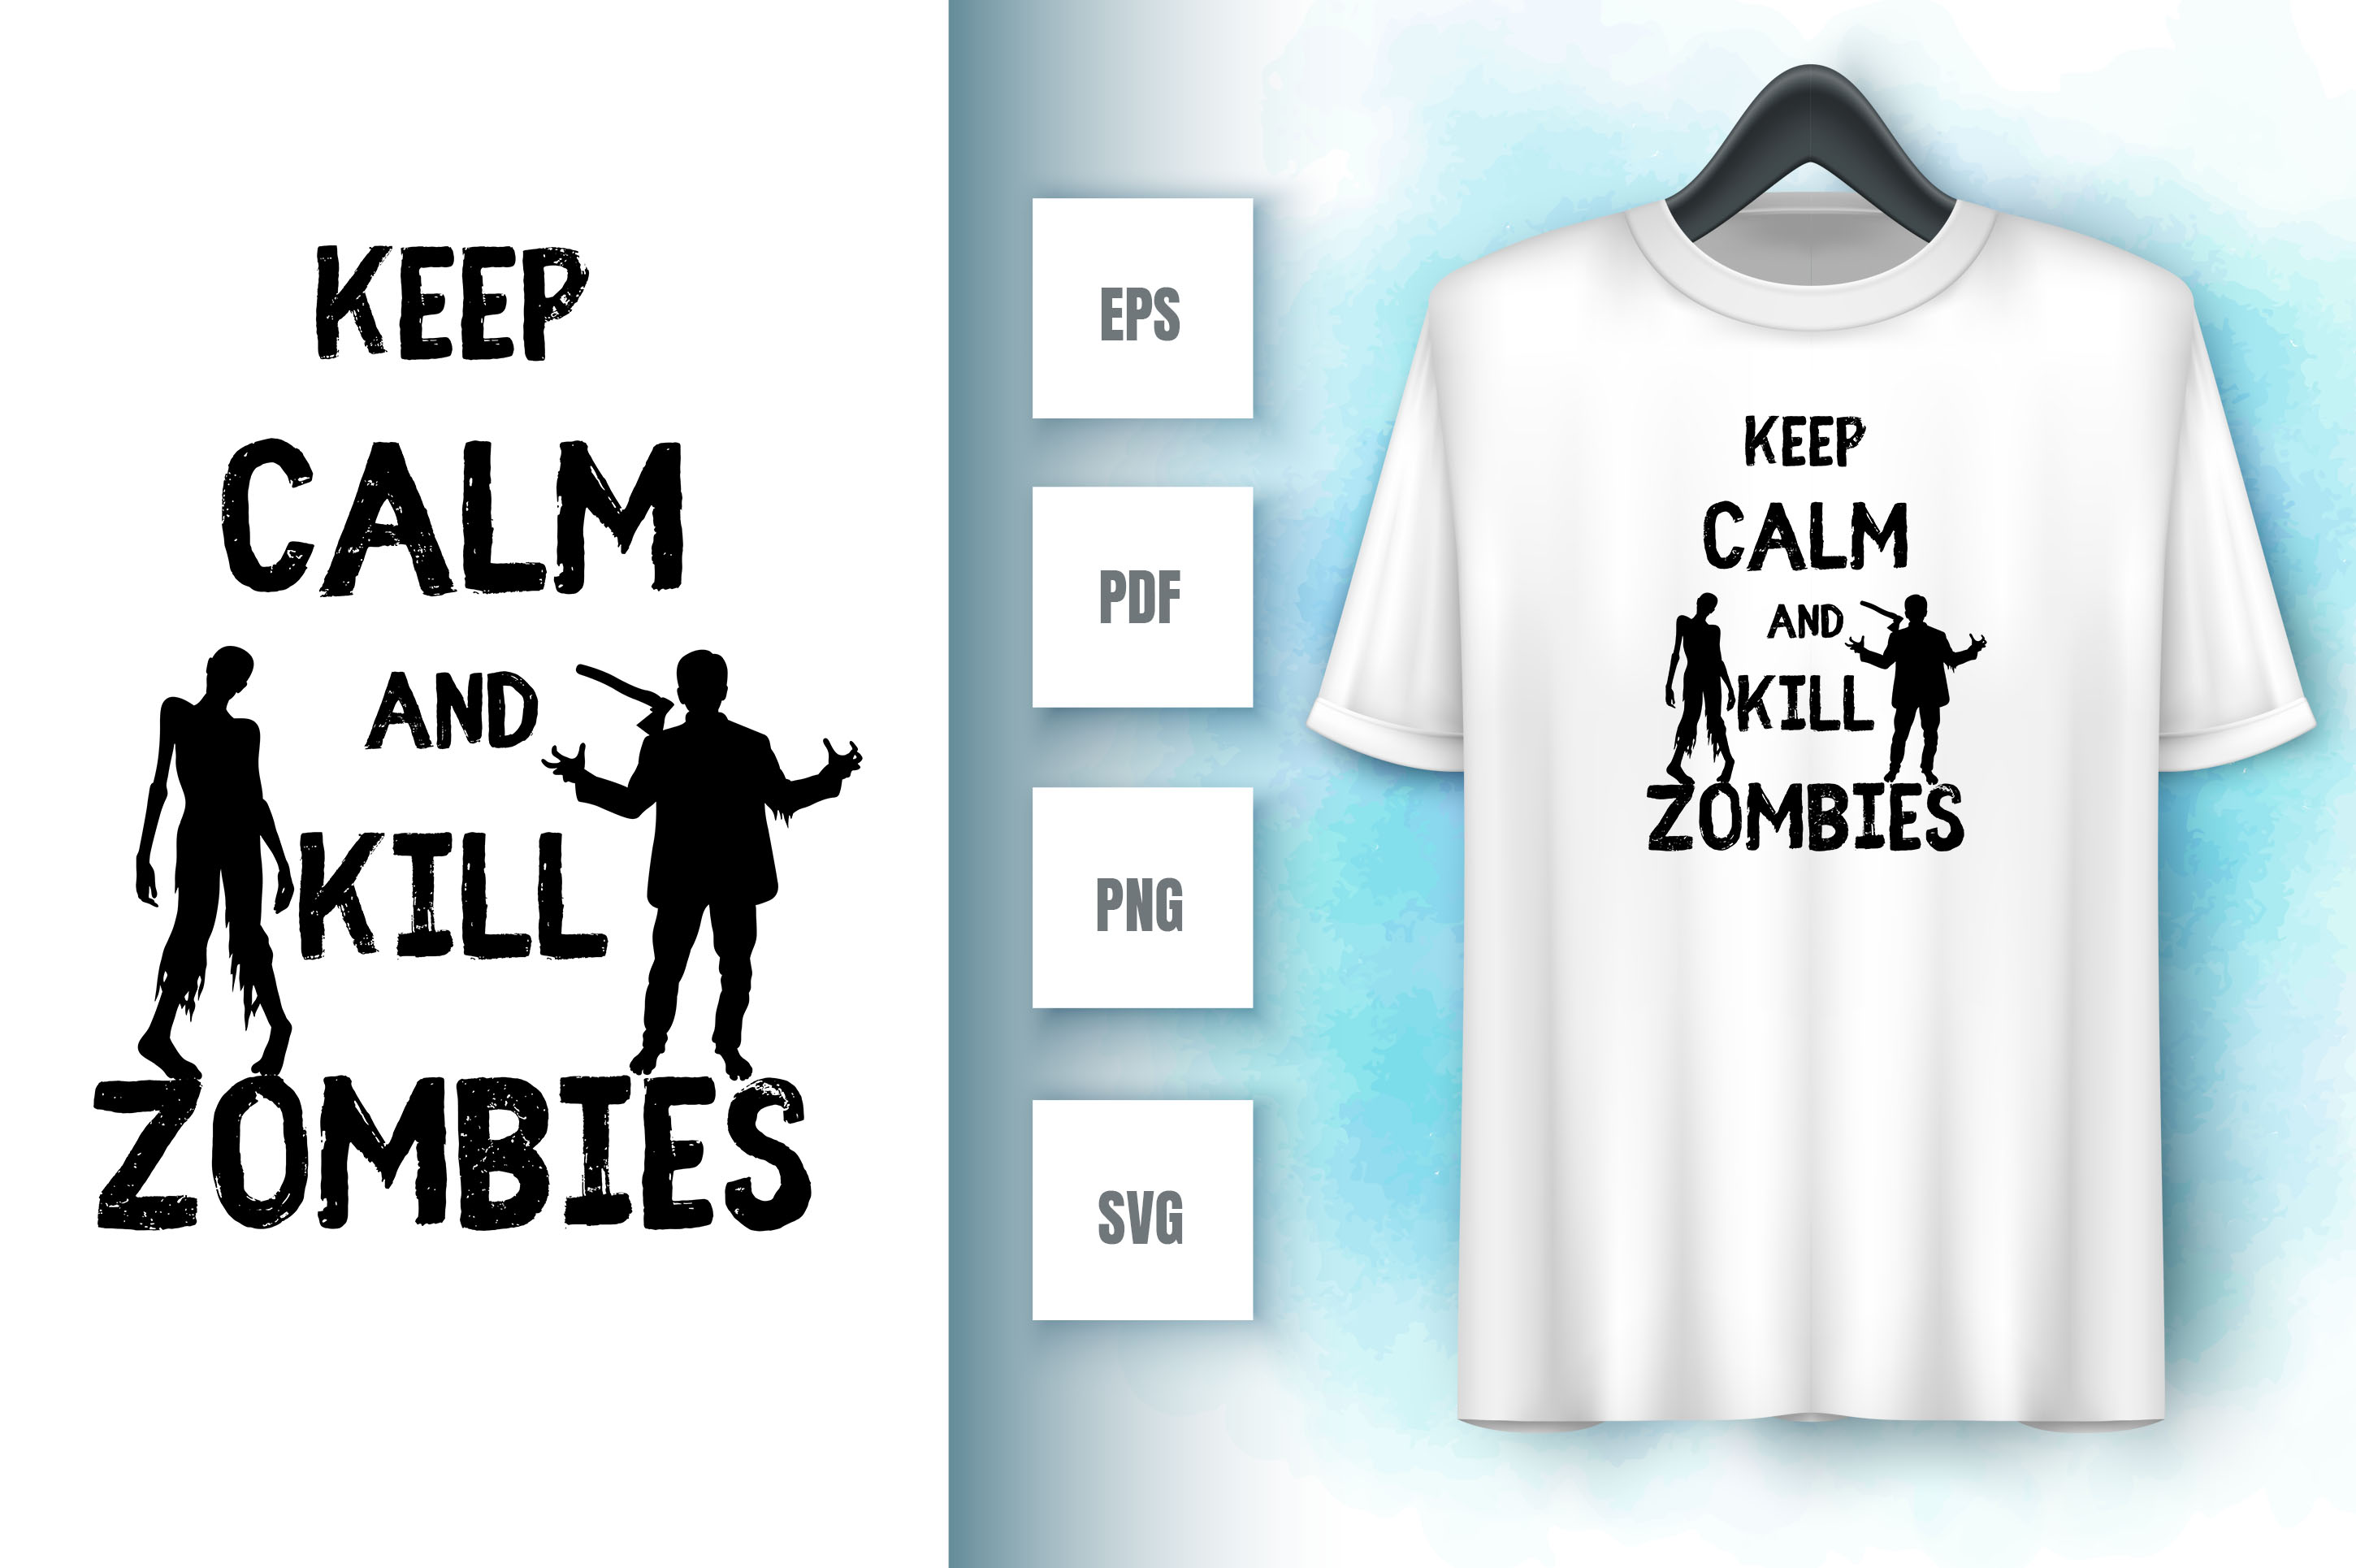 Image of a white t-shirt with an amazing inscription keep calm and kill zombies